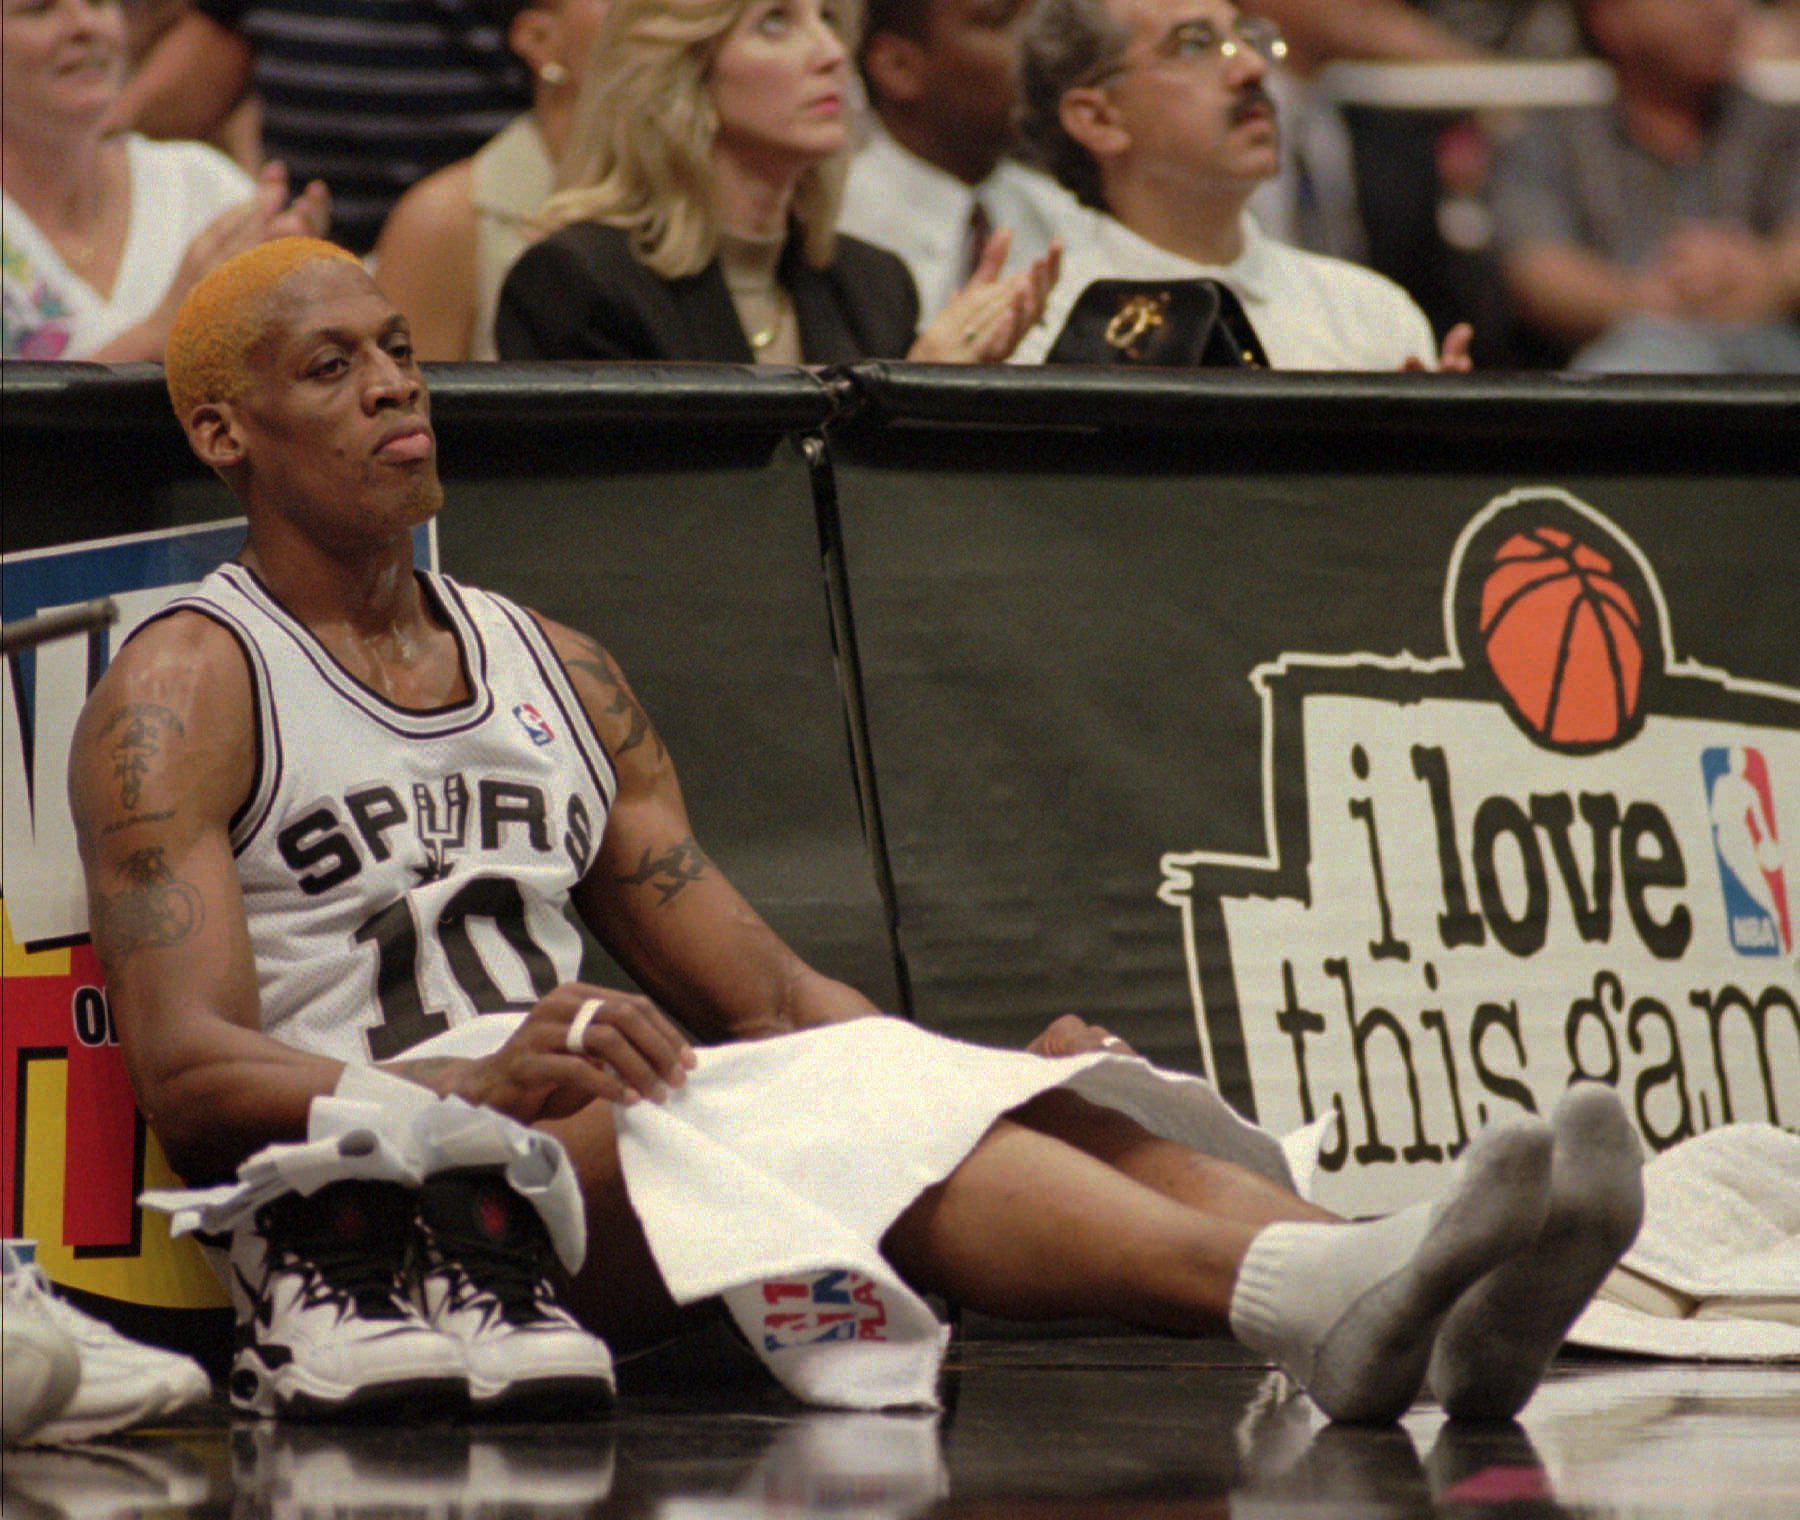 Dennis Rodman sitting on the sidelines waiting to check into an NBA game.